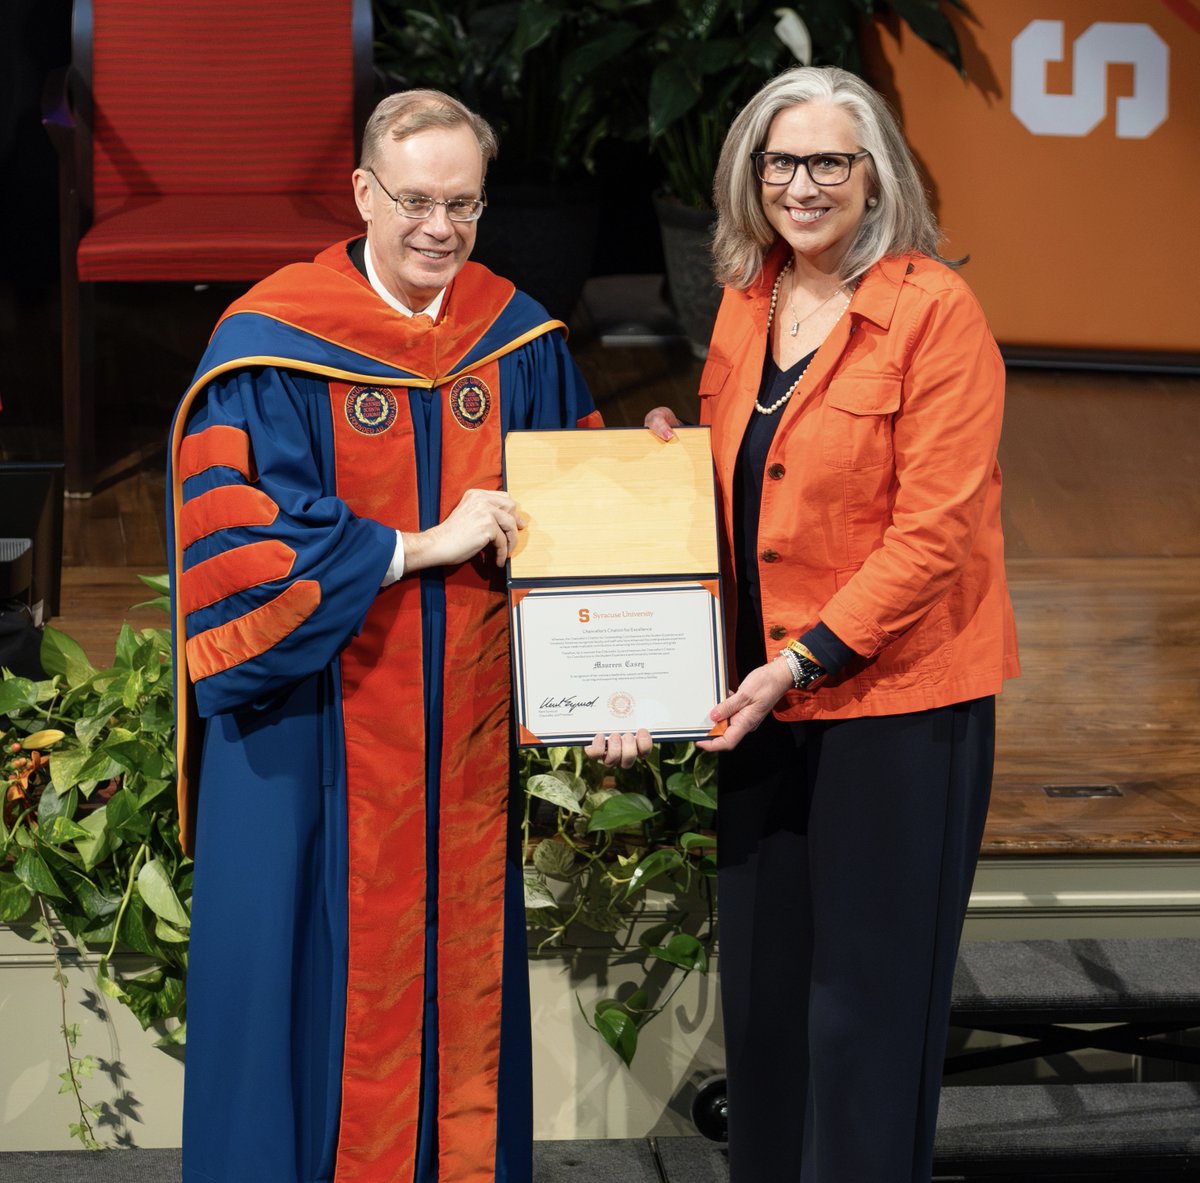 Tonight, @SyracuseU's Chancellor Kent Syverud awarded our COO, Maureen Casey, the Outstanding Contributions Award for her efforts in making invaluable contributions to supporting our university's mission. Congratulations, Maureen!